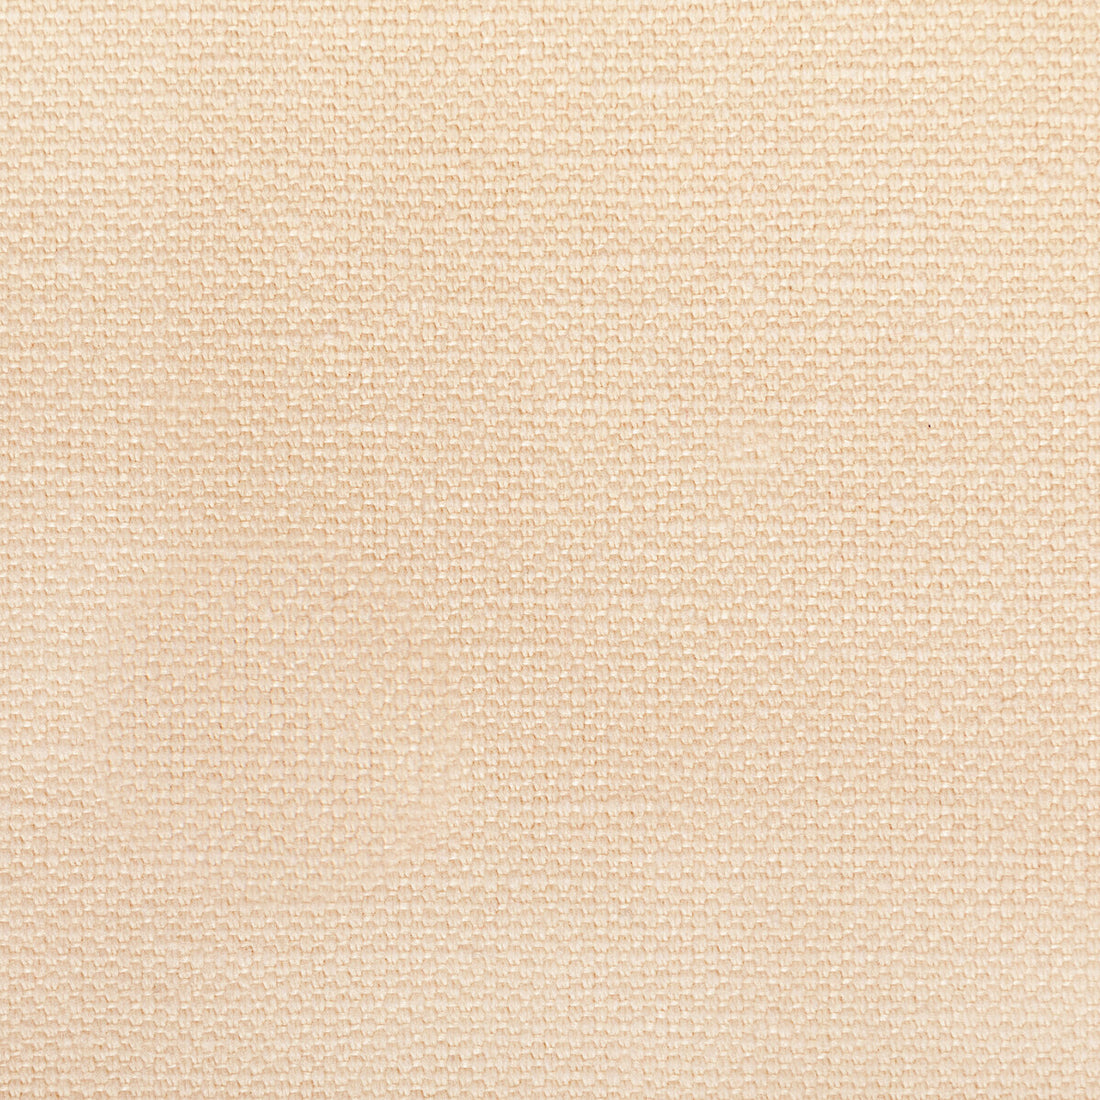 Carson fabric in natural color - pattern 36282.1111.0 - by Kravet Basics